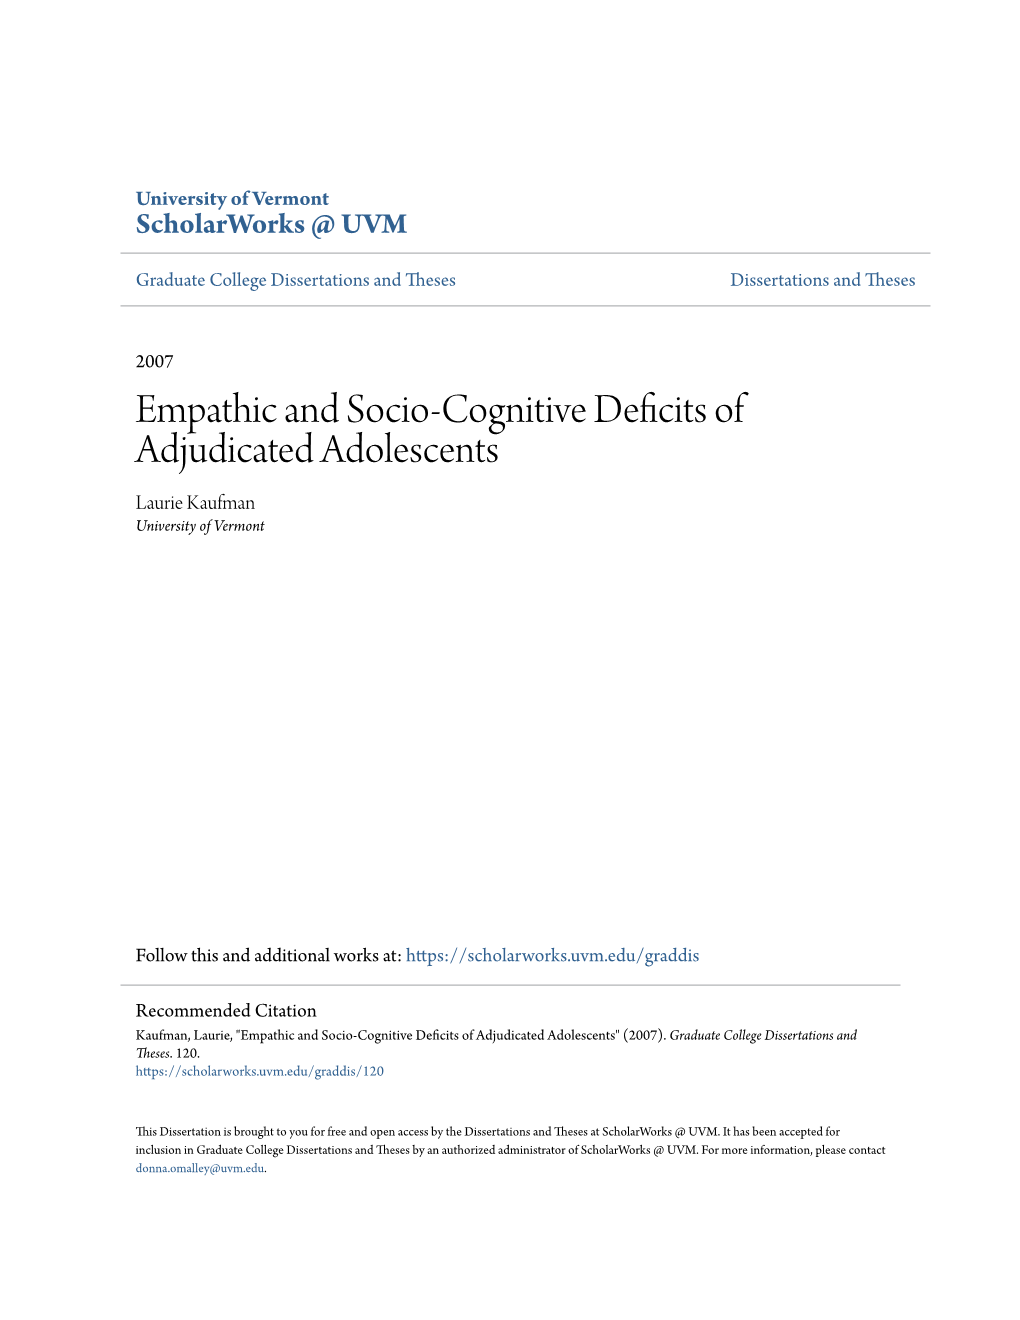 Empathic and Socio-Cognitive Deficits of Adjudicated Adolescents Laurie Kaufman University of Vermont